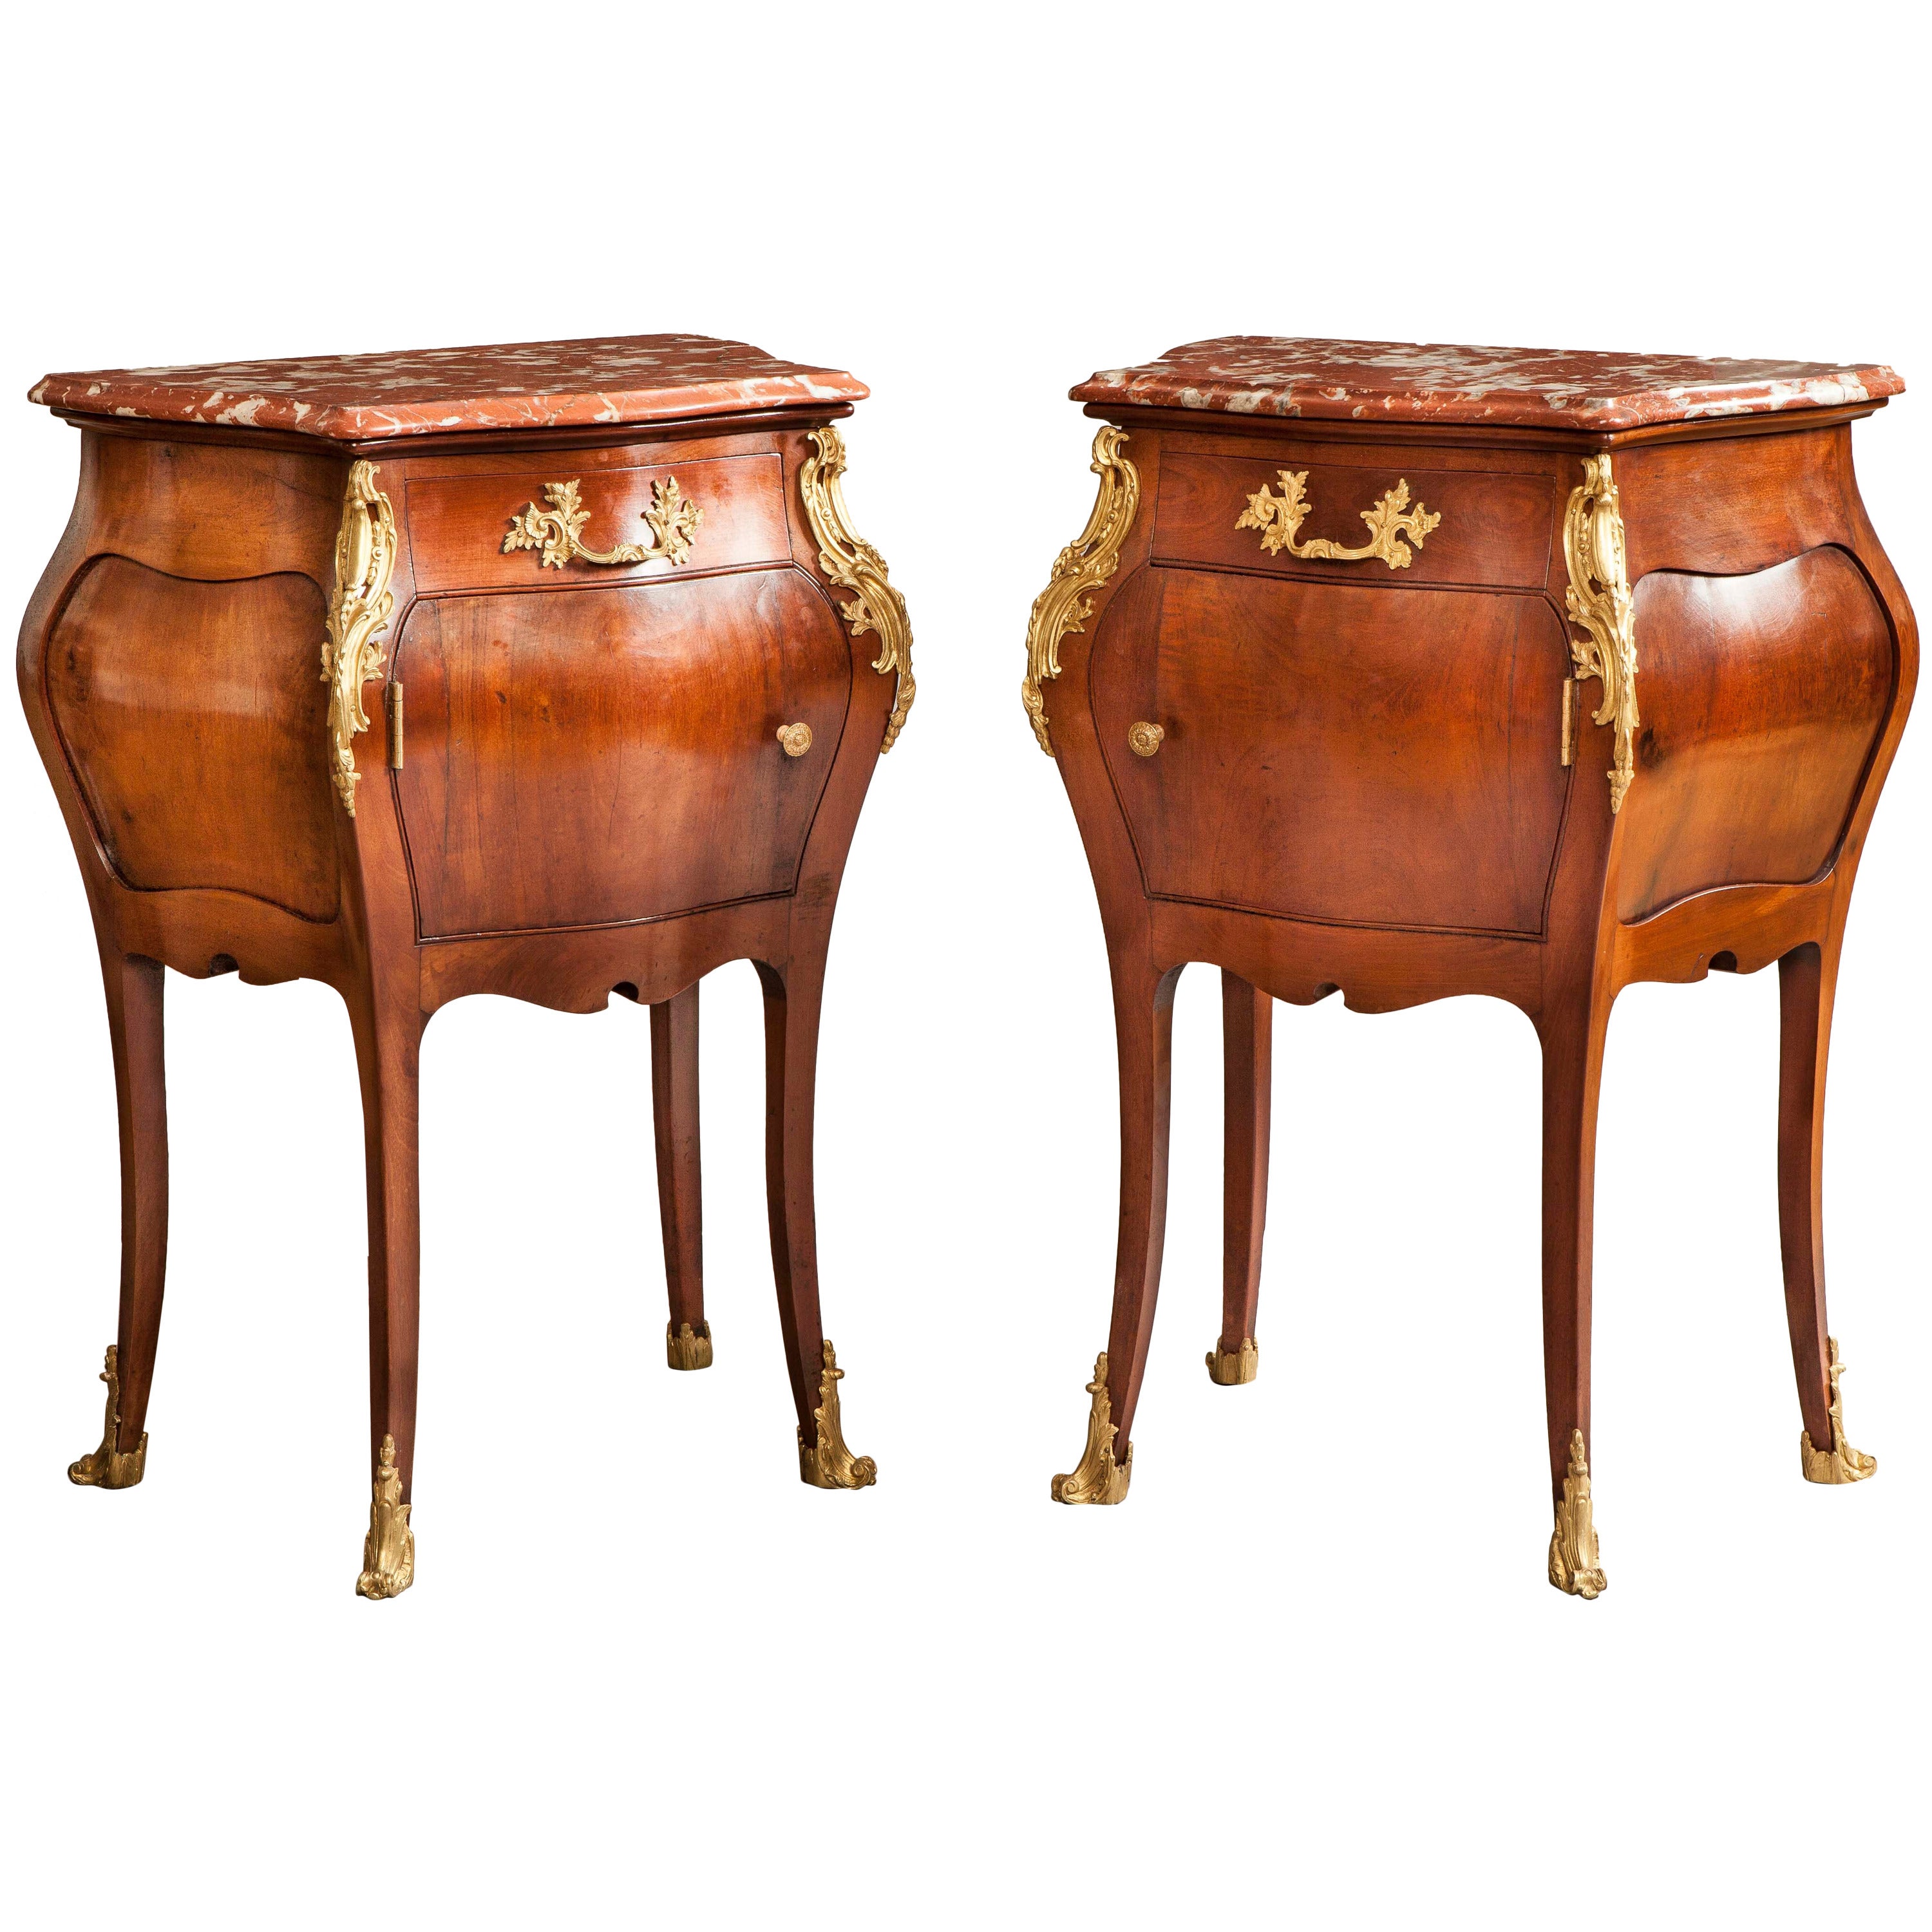 Pair of French Mahogany, Gilt and Marble Topped Side Cabinets, 19th Century For Sale